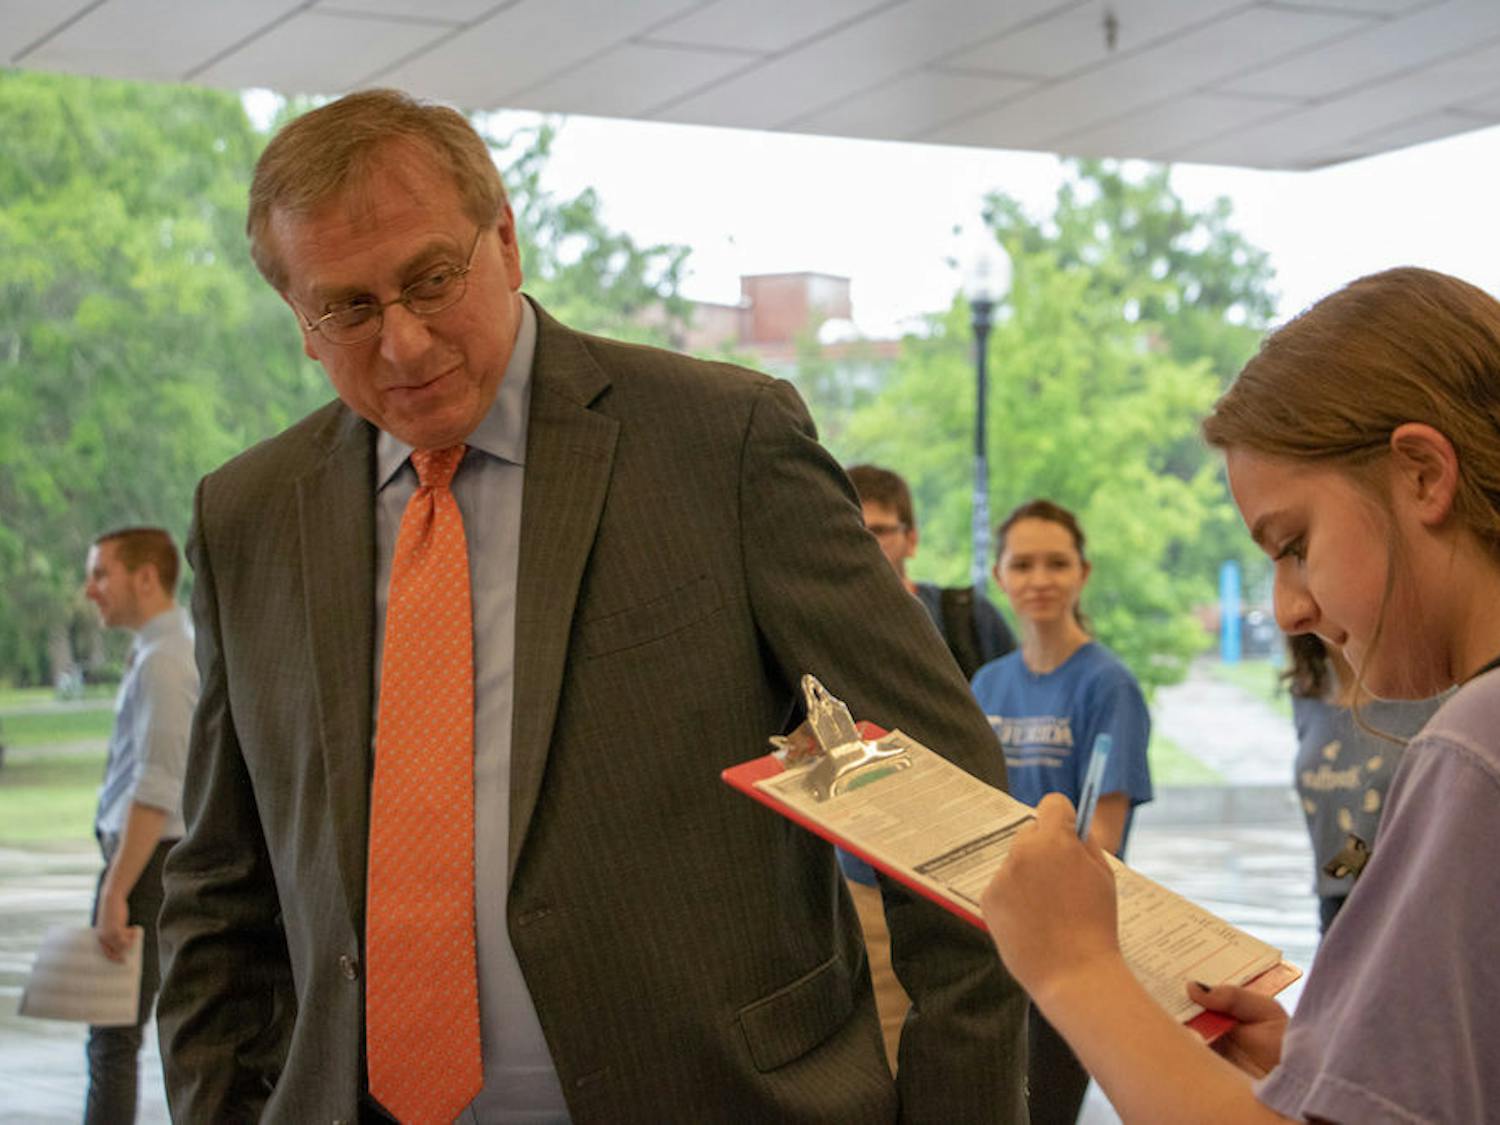 From left: UF President Kent Fuchs assists Natalie Evelev, an 18-year-old UF biomedical engineering freshman, with registering to vote at the Voter Registration Drive with UF President Kent Fuchs and Alachua County Supervisor of Elections Kim Barton outside the Reitz Union on Monday afternoon. Evelev said she wanted to register to vote.